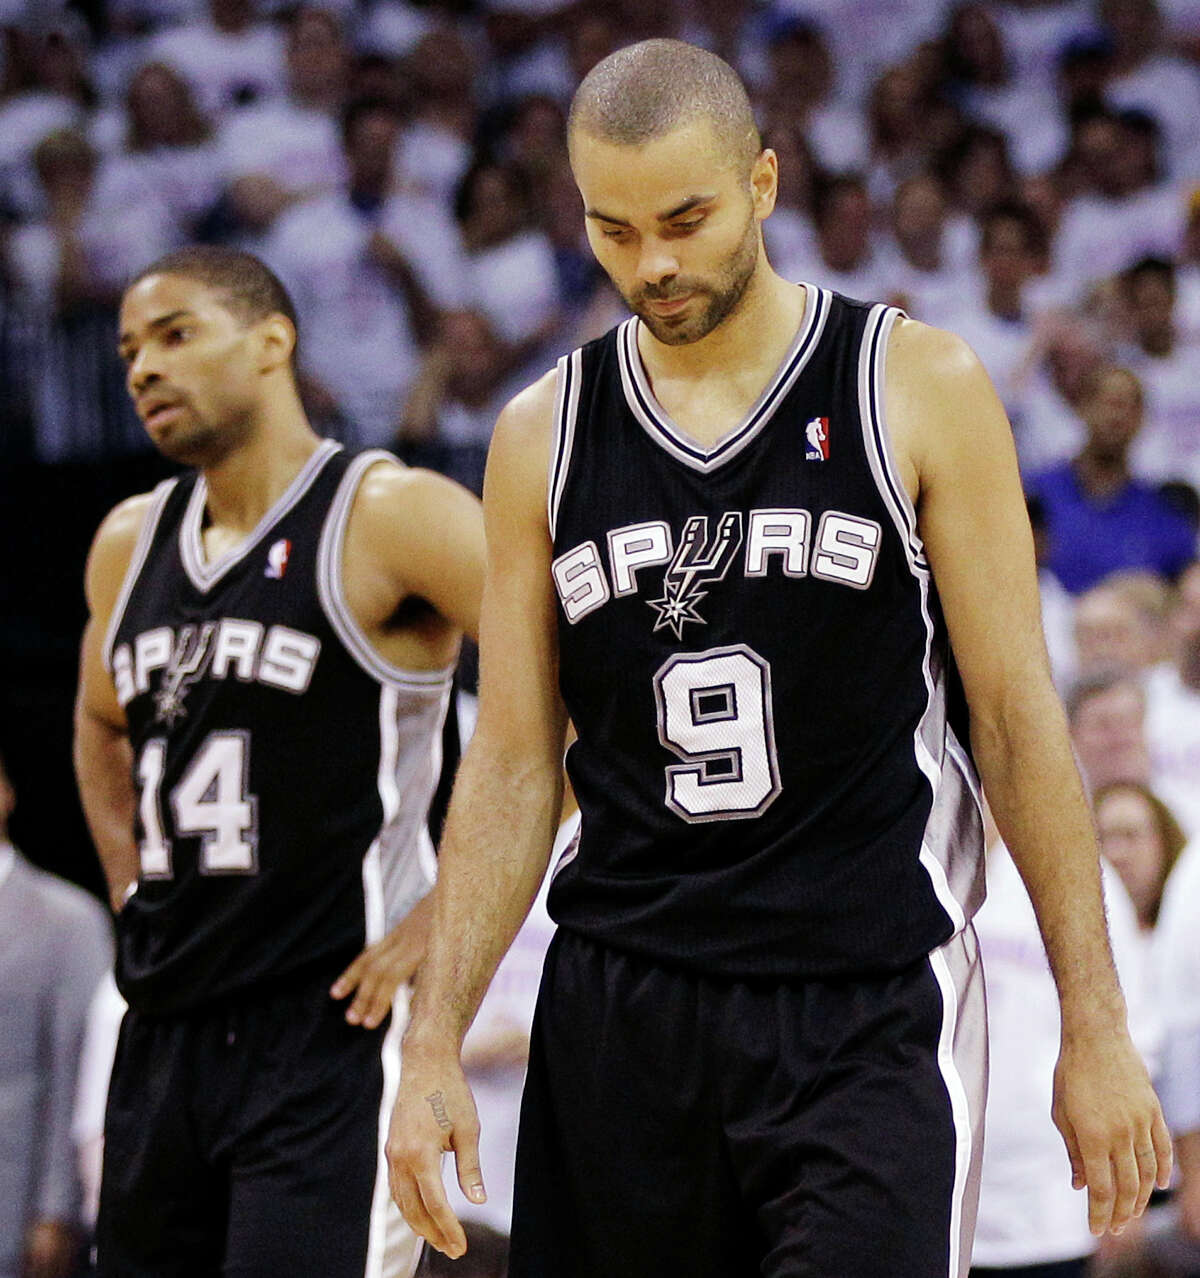 San Antonio Spurs point guard Tony Parker (9), of France, and guard Gary Neal (14) head to the sideline against the Oklahoma City Thunder during the second half of Game 6 in the NBA basketball Western Conference finals, Wednesday, June 6, 2012, in Oklahoma City. (AP Photo/Eric Gay)